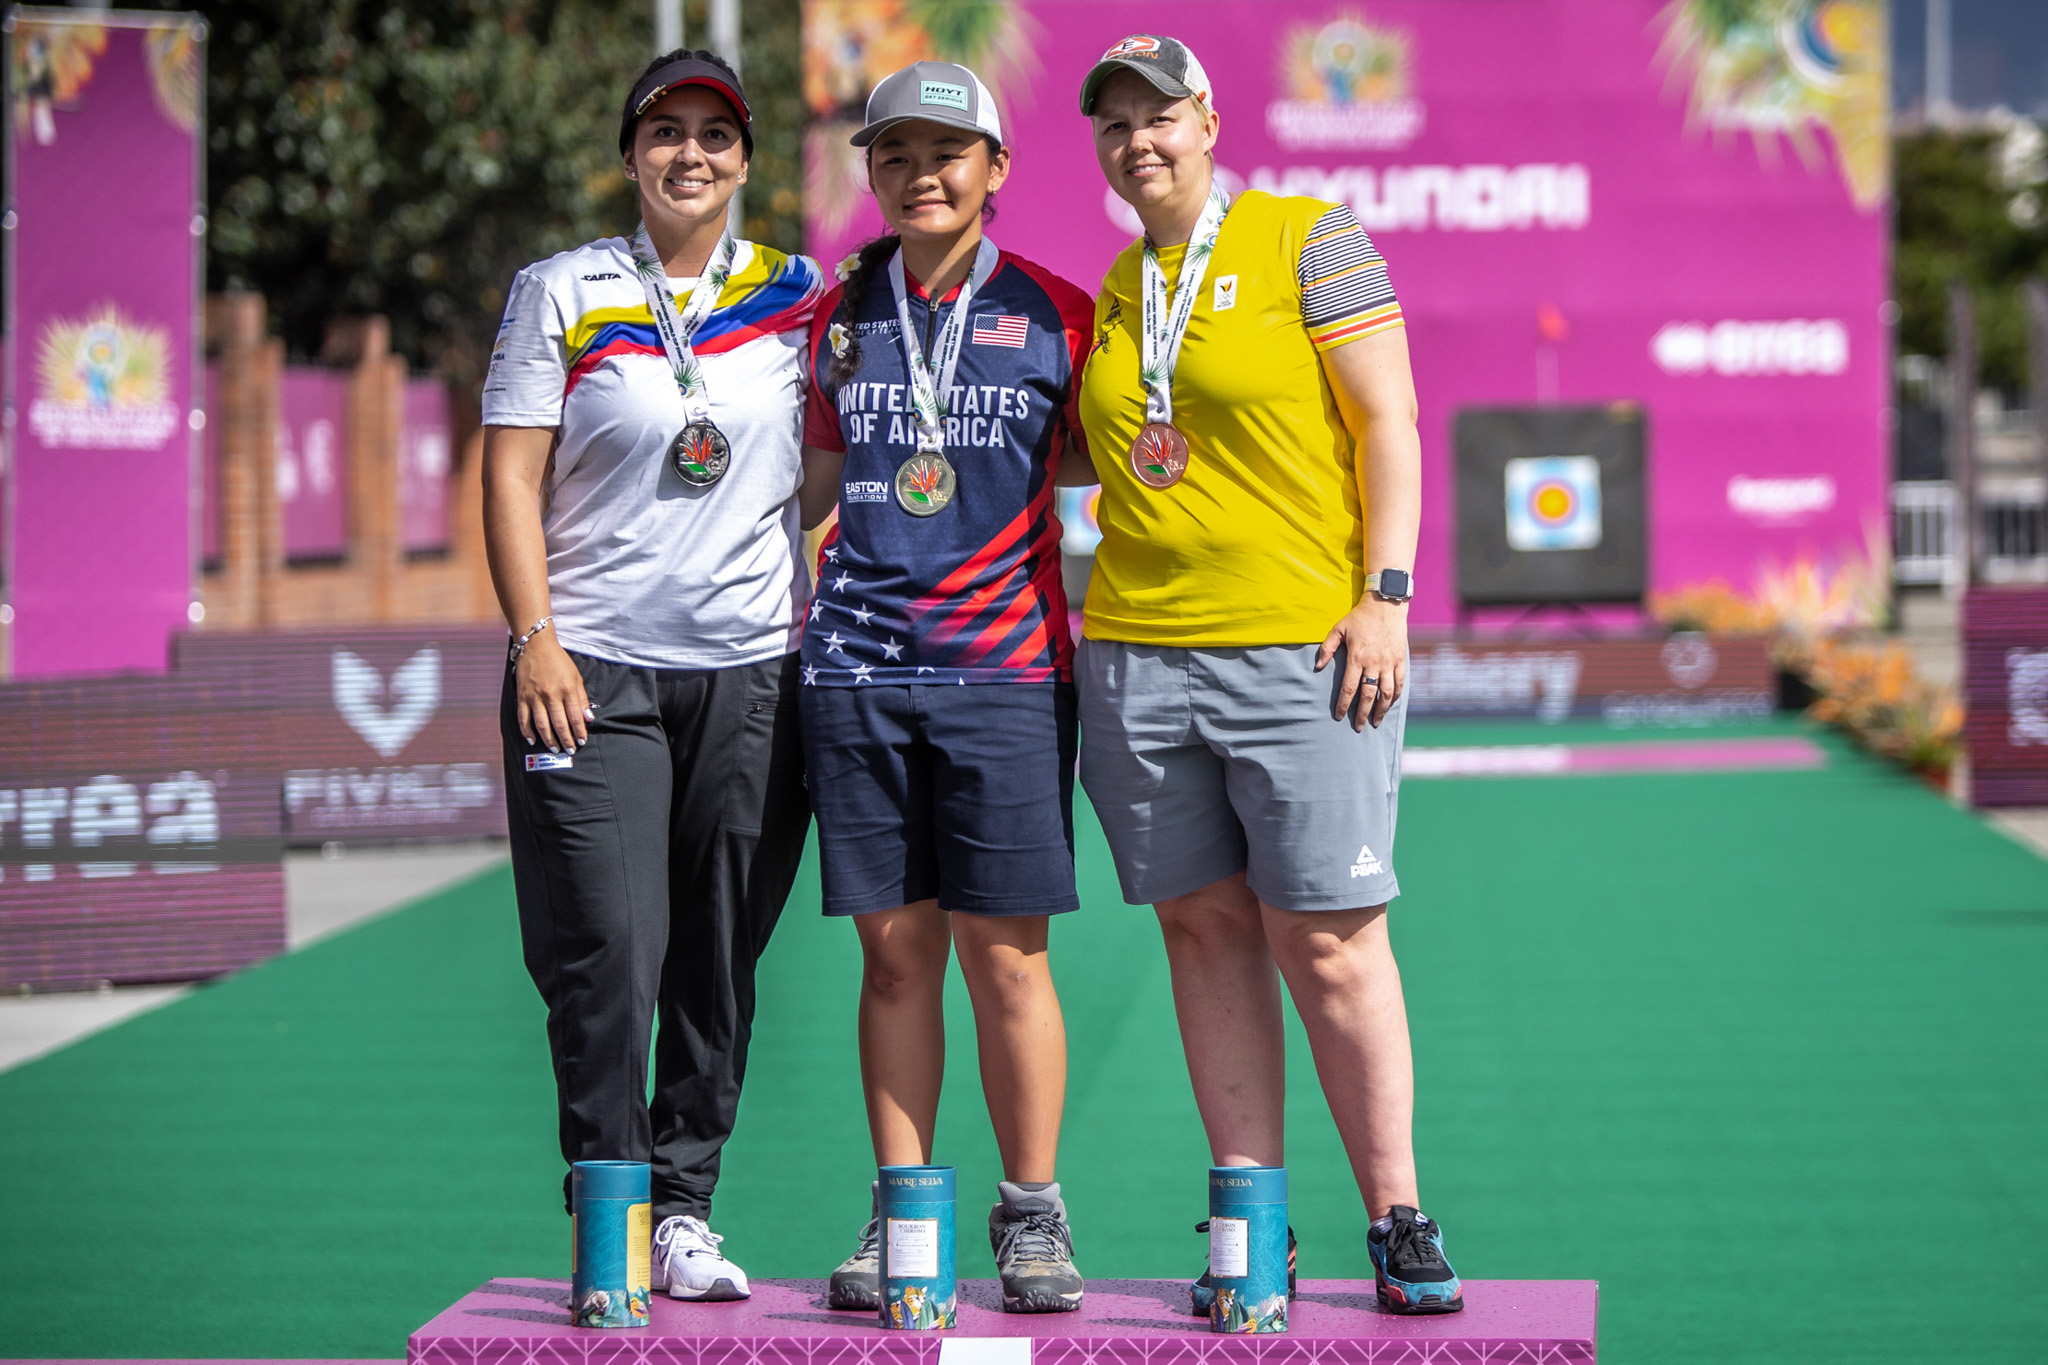 Liko Arreola, Sara Lopez, and Sarah Prieels at the World Championships archery shoot in Medellin.